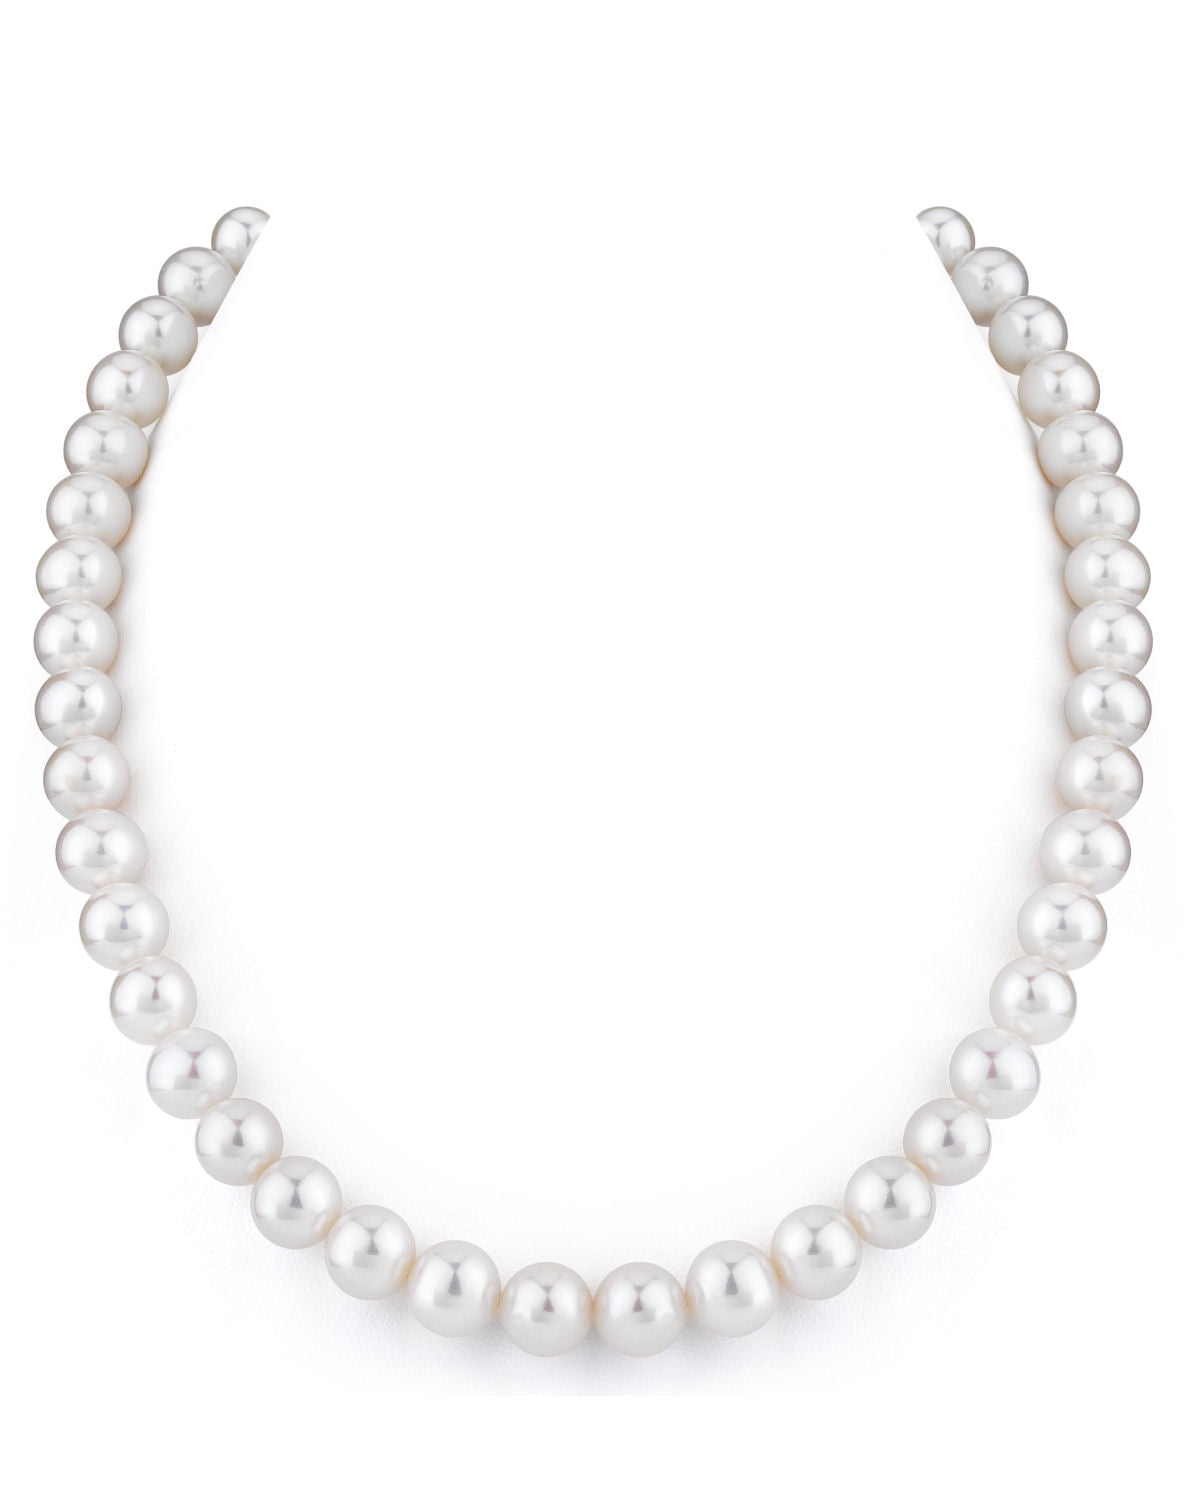 New Real Natural 6-7mm South Sea White Freshwater Pearl Long Necklaces 36 Inch 